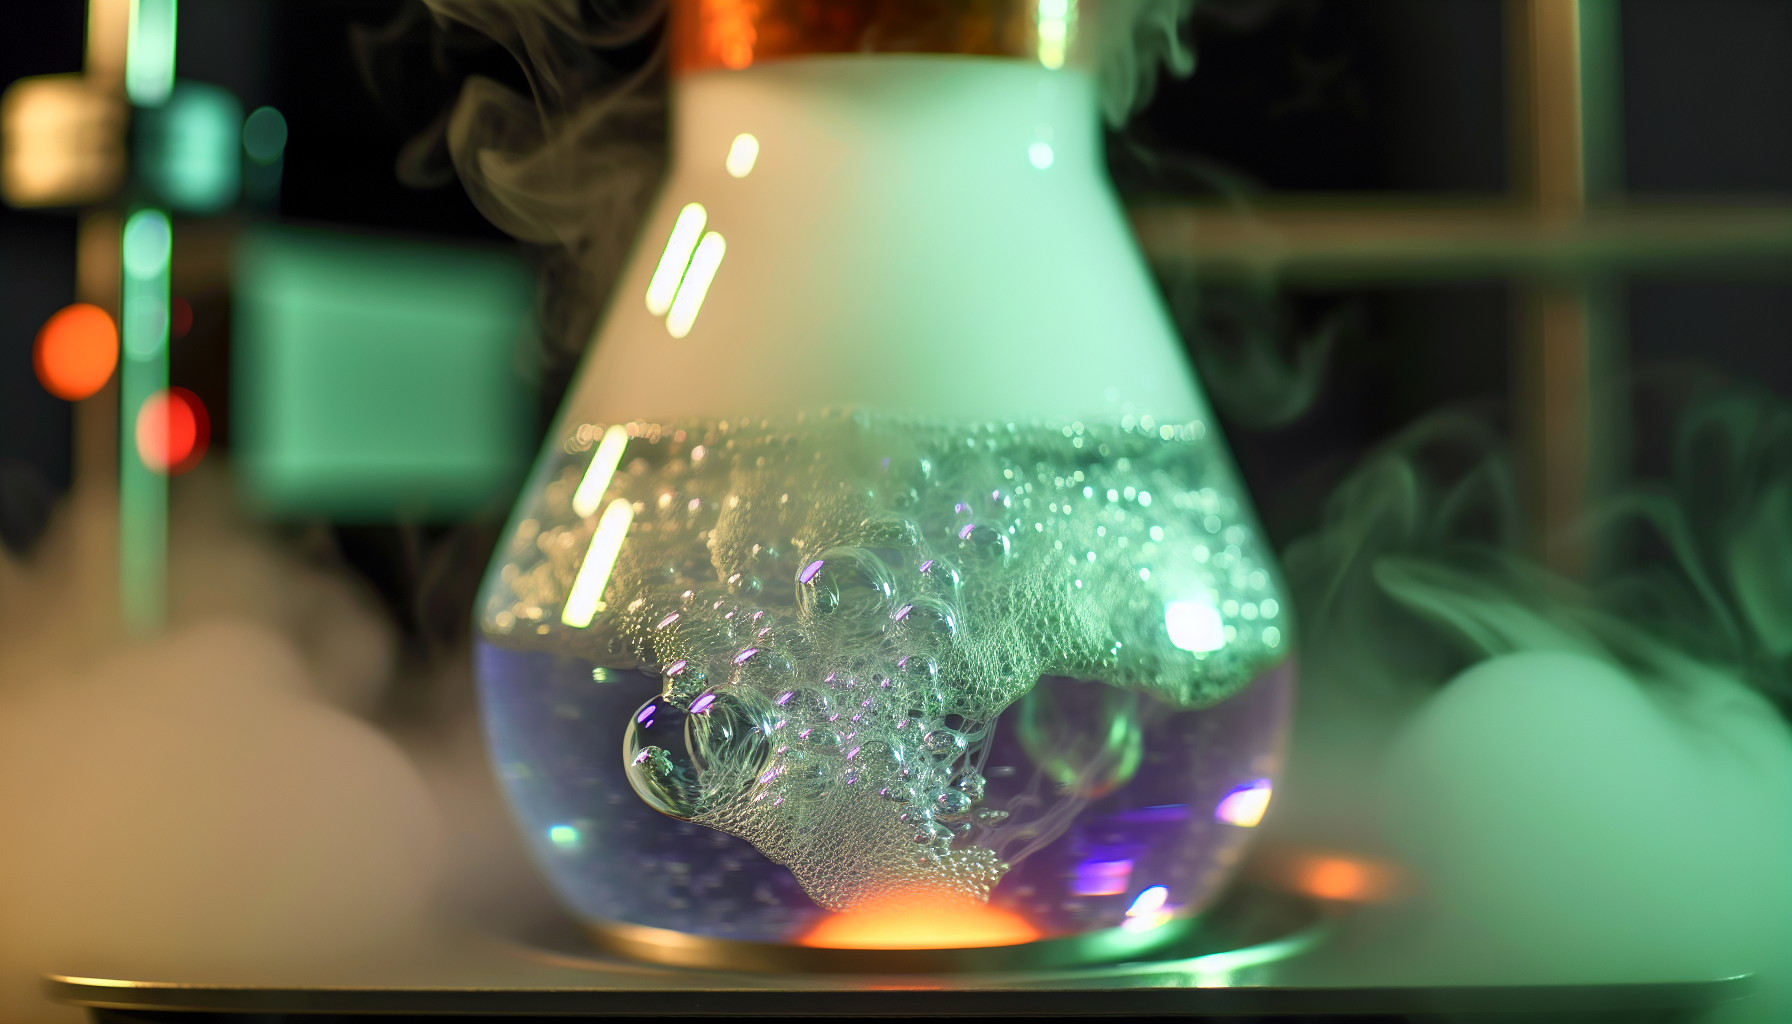 A close-up of an Erlenmeyer flask containing boiling liquid